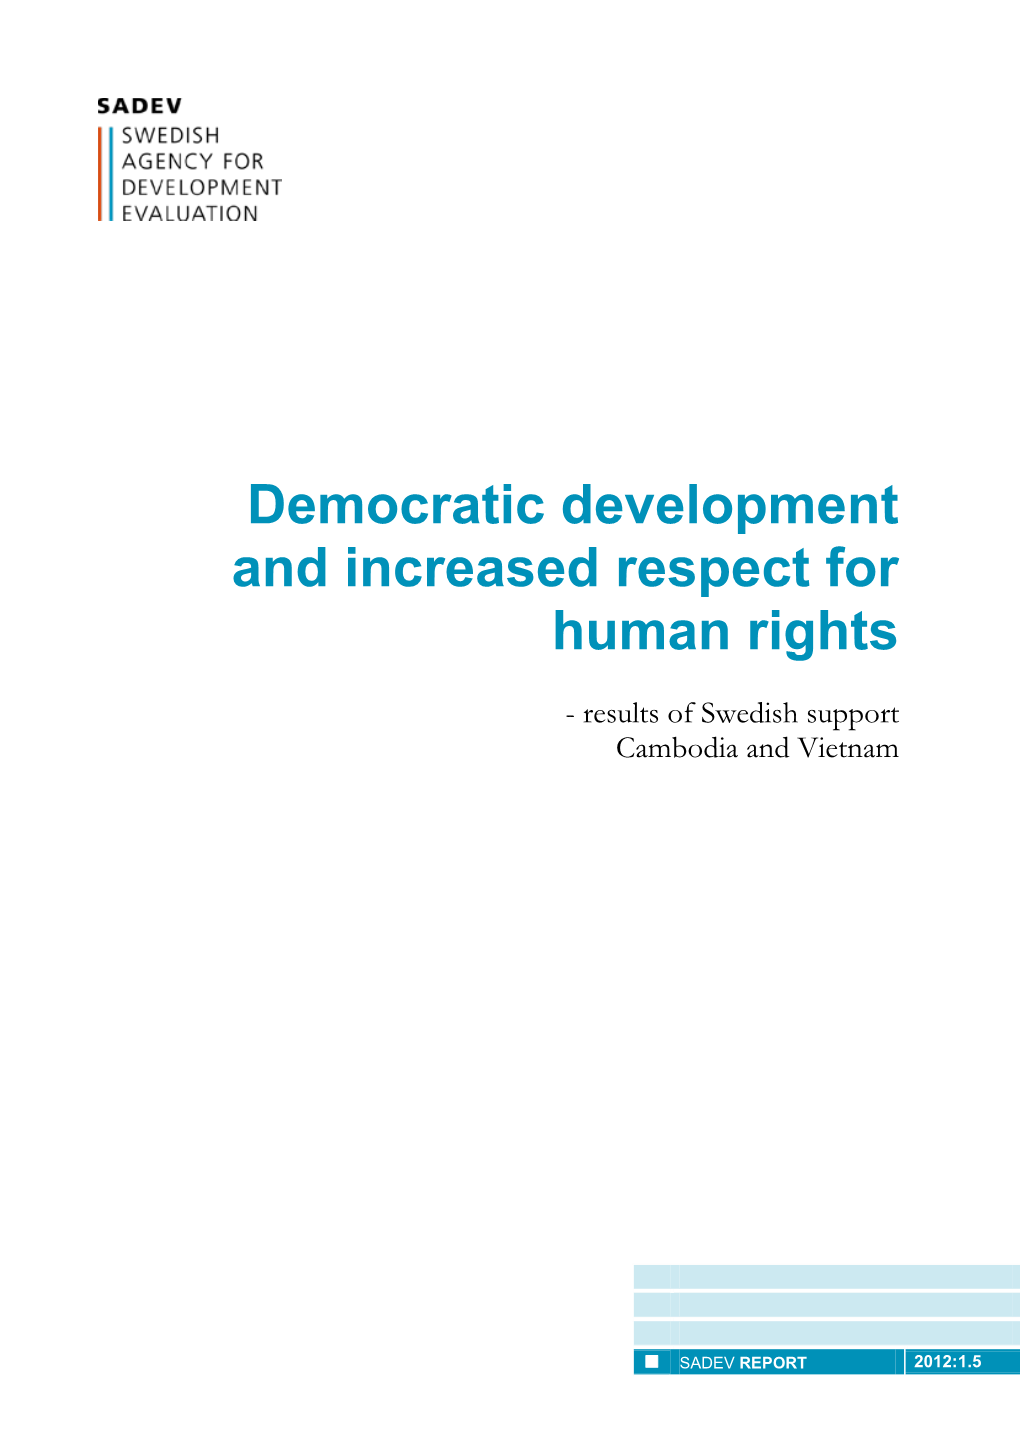 Democratic Development and Increased Respect for Human Rights